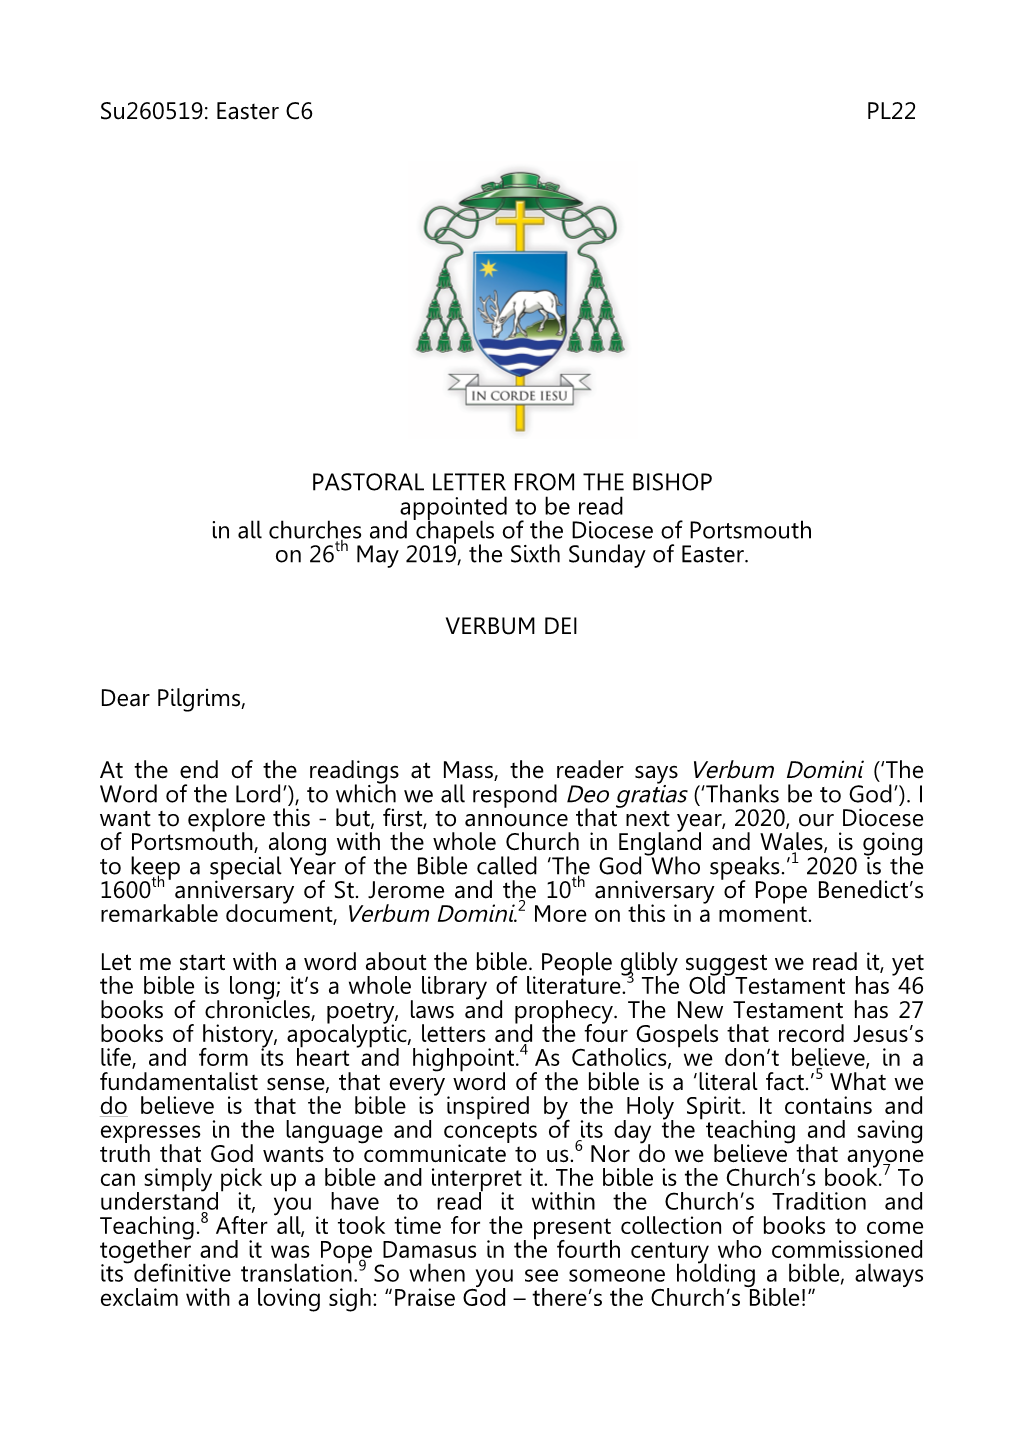 Easter C6 PL22 PASTORAL LETTER from the BISHOP Appointed To